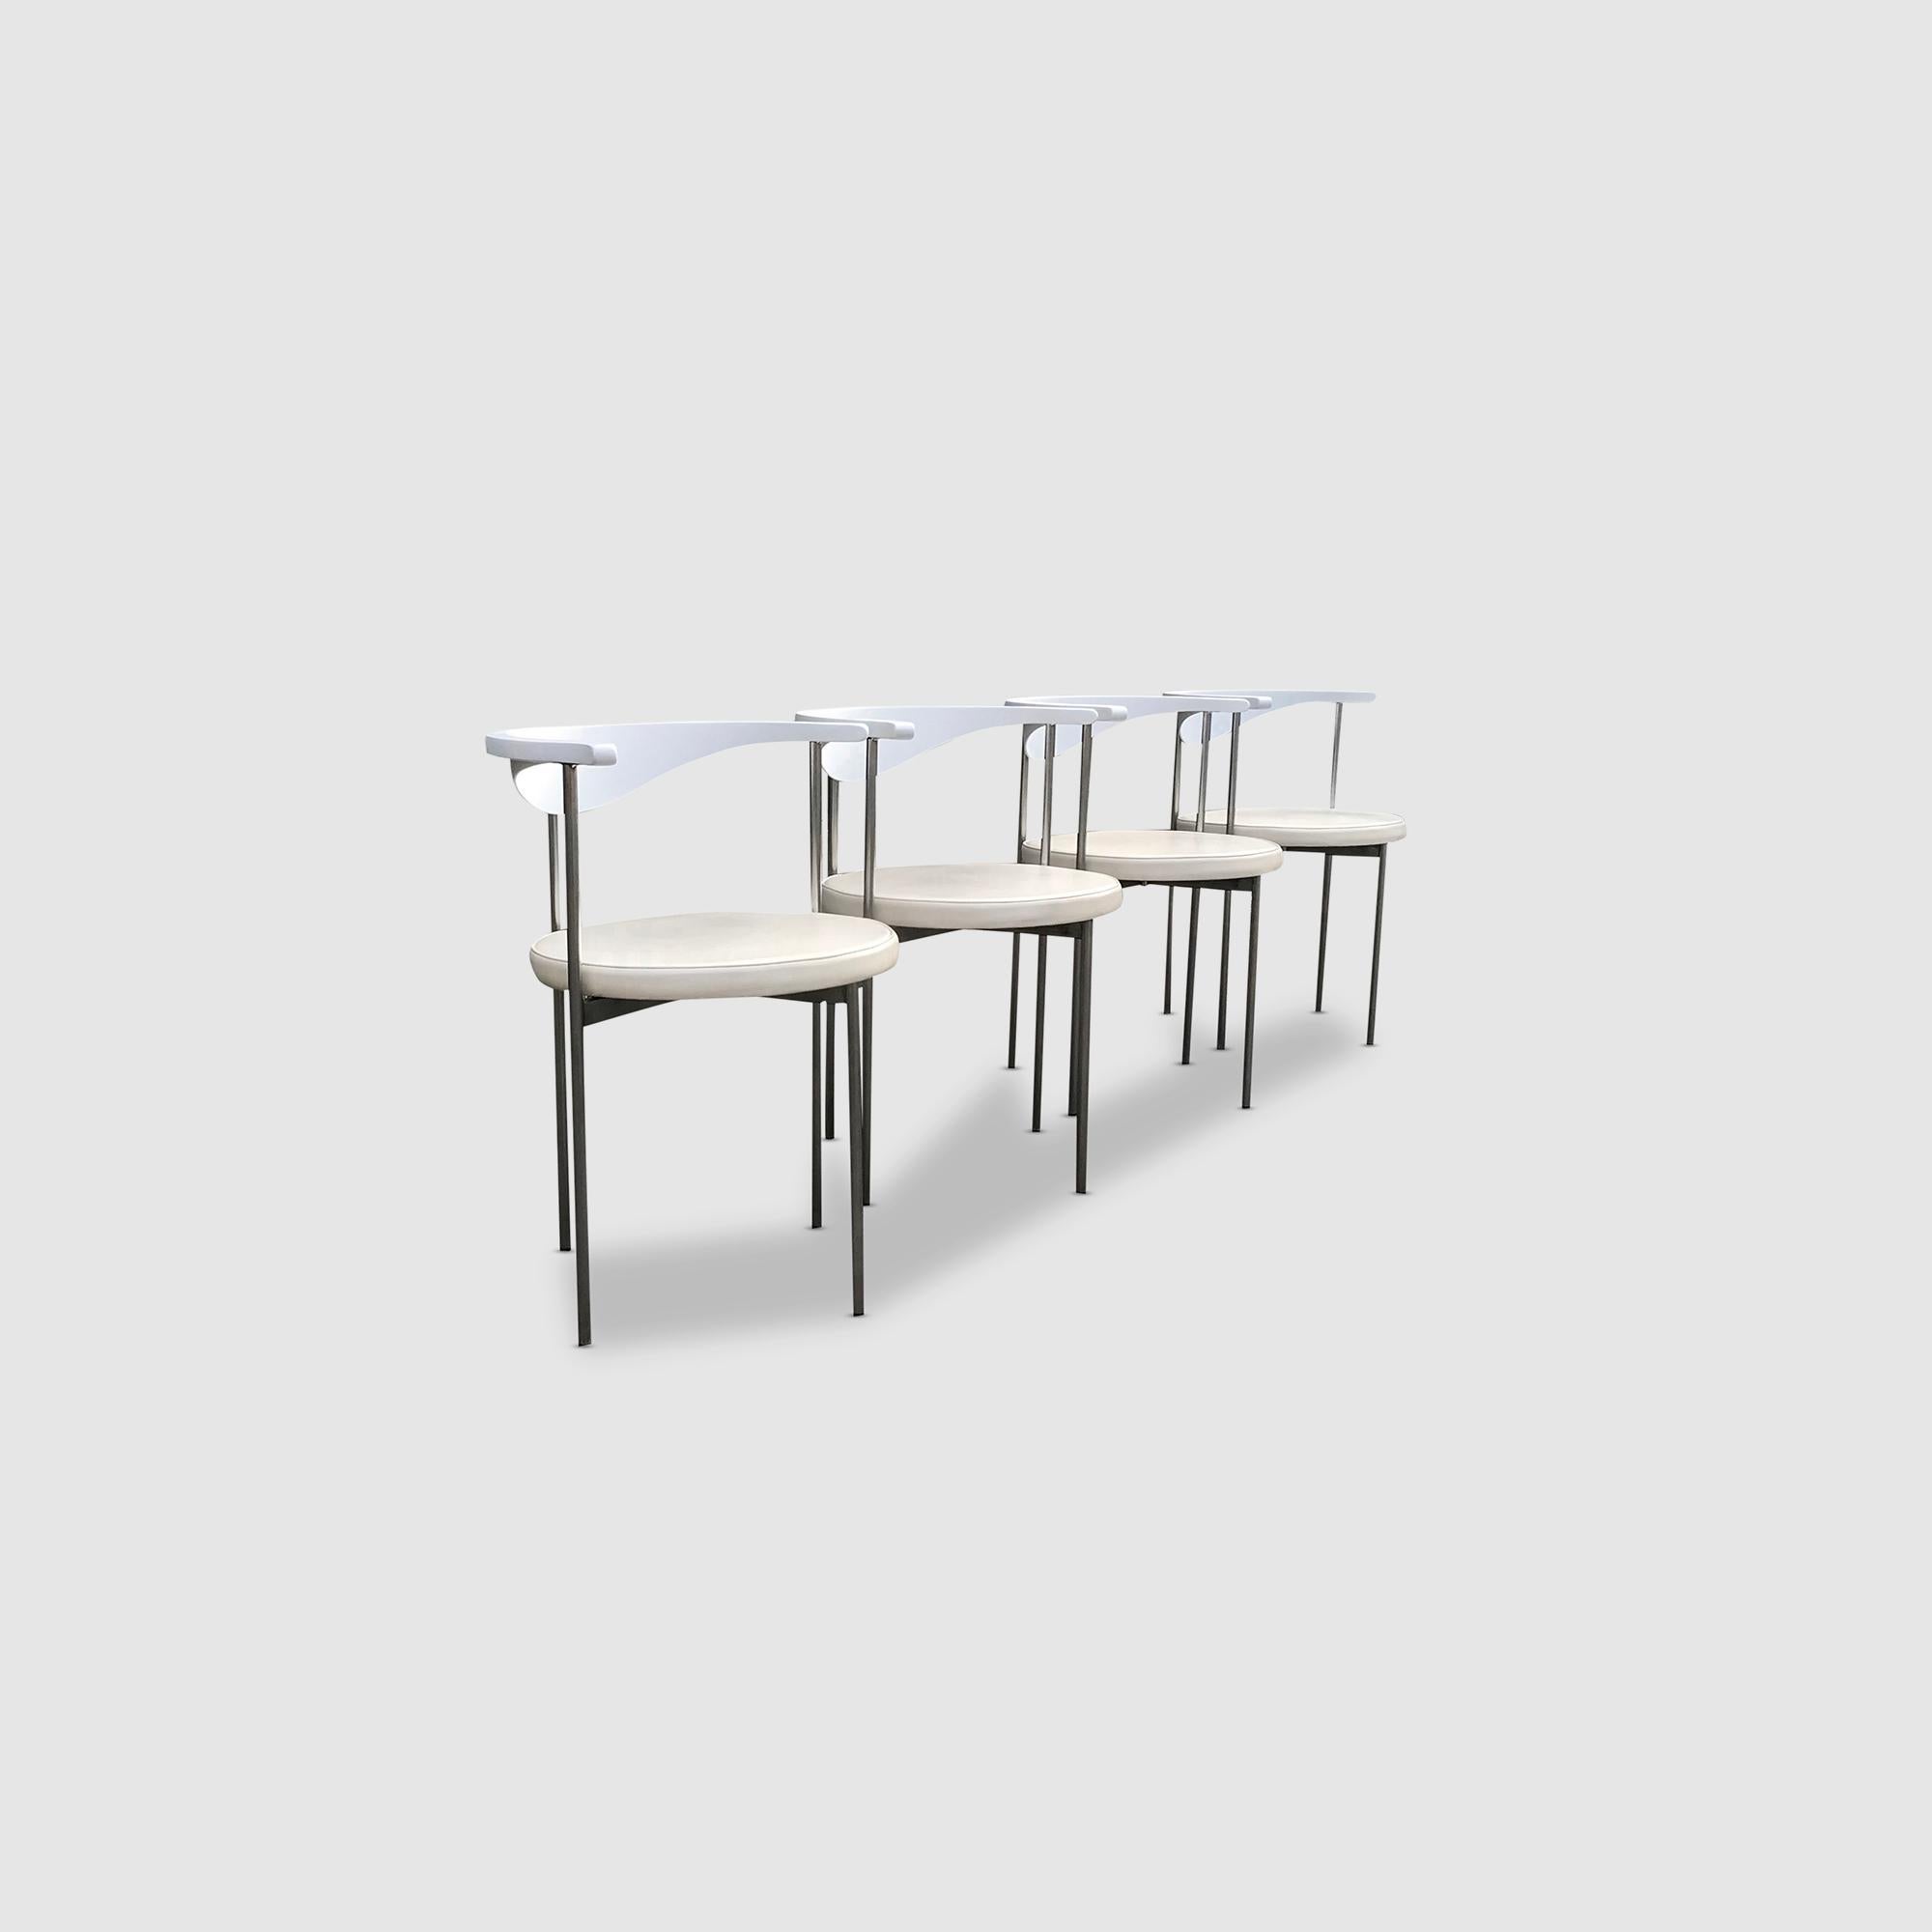 An elegant set of 4 model 3200 dining chairs by Frederik Sieck.

This design certainly has its roots in Japanese design by the curved shape of the backrest and the slim narrow feet.The round upholstered seat certainly enforces this further. As well,